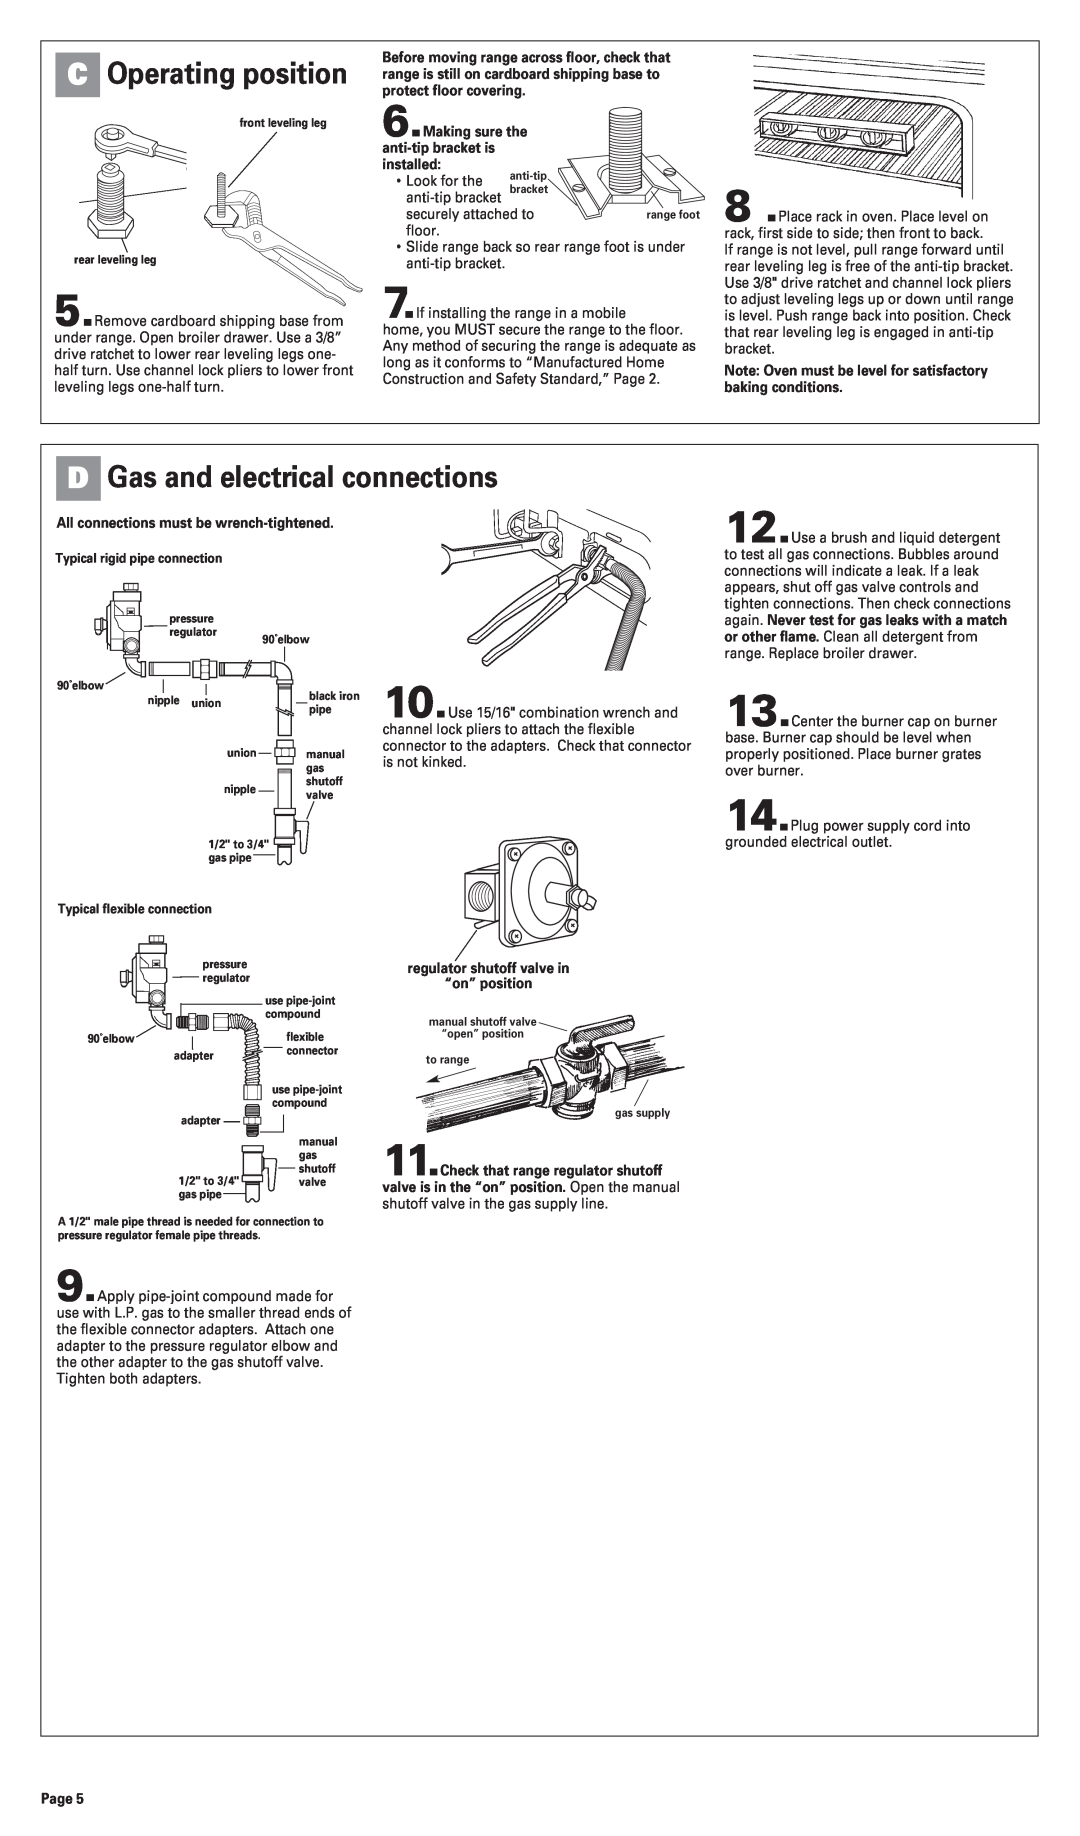 Whirlpool 8053365 installation instructions D Gas and electrical connections, C Operating position 